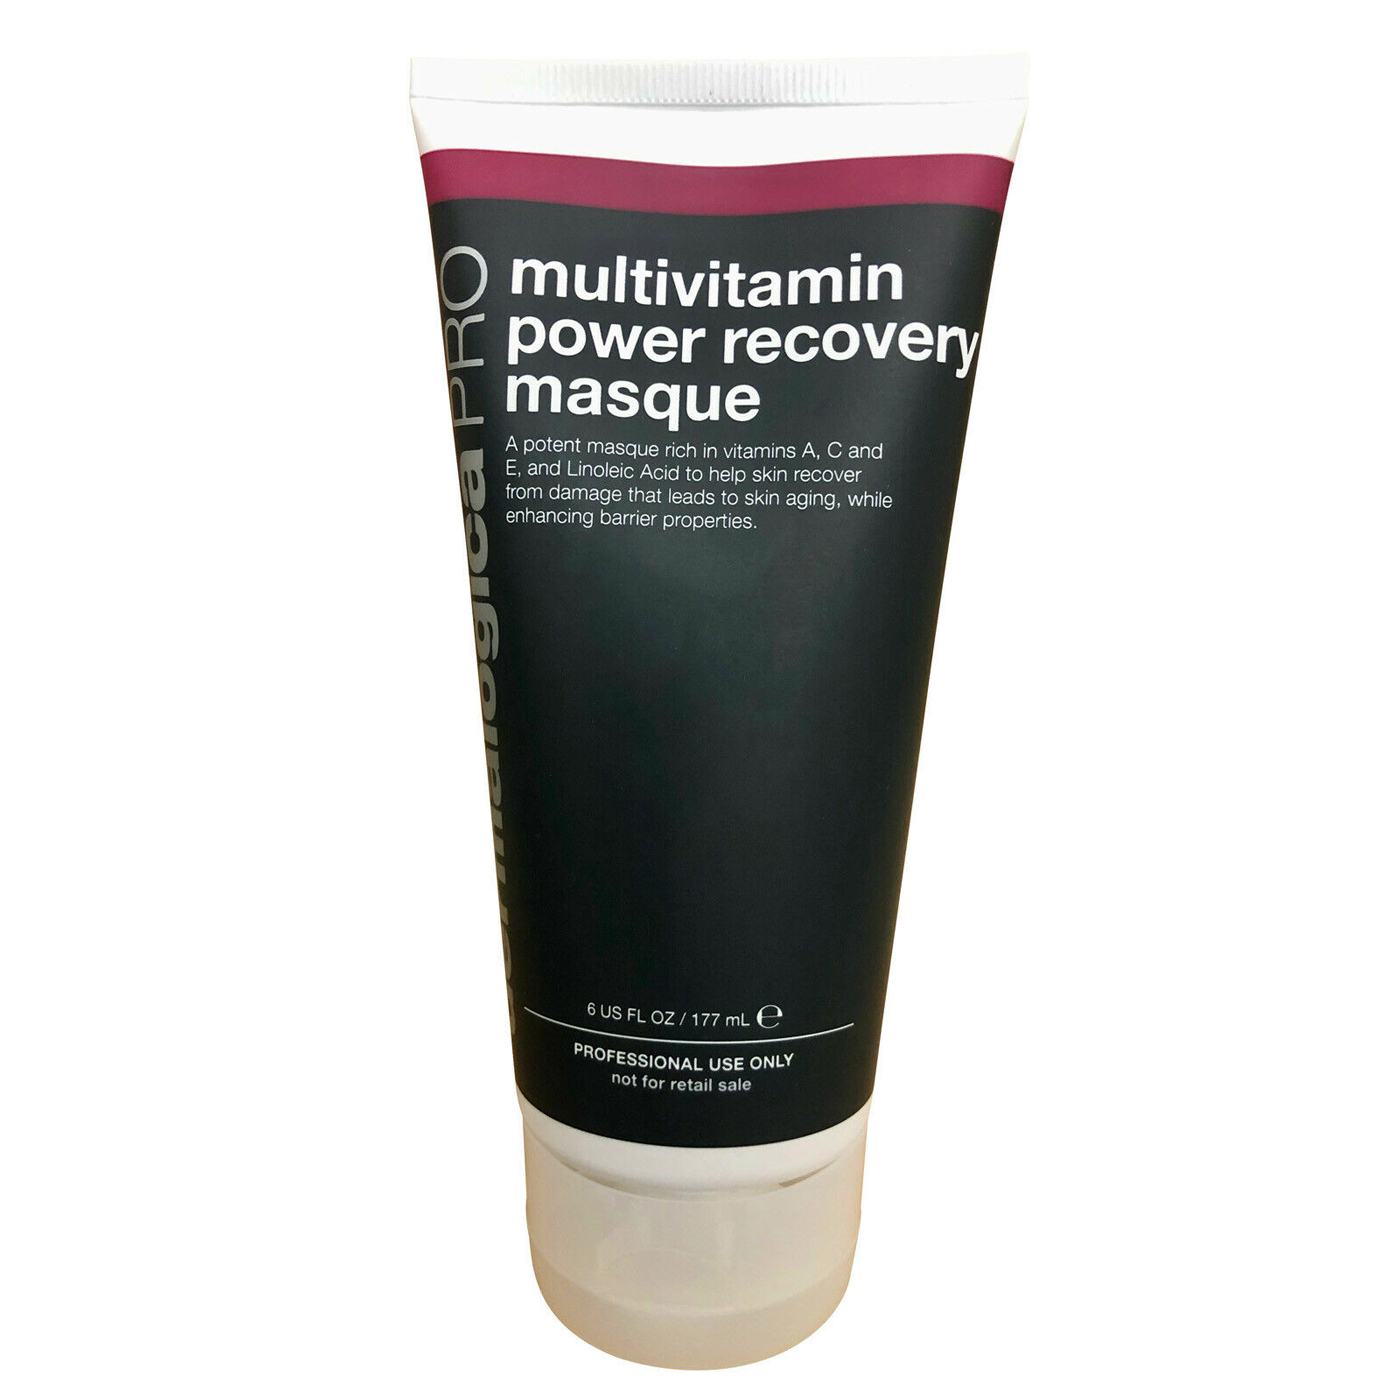 Dermalogica Multivitamin Power Recovery Masque 6oz/177ml - image 1 of 1